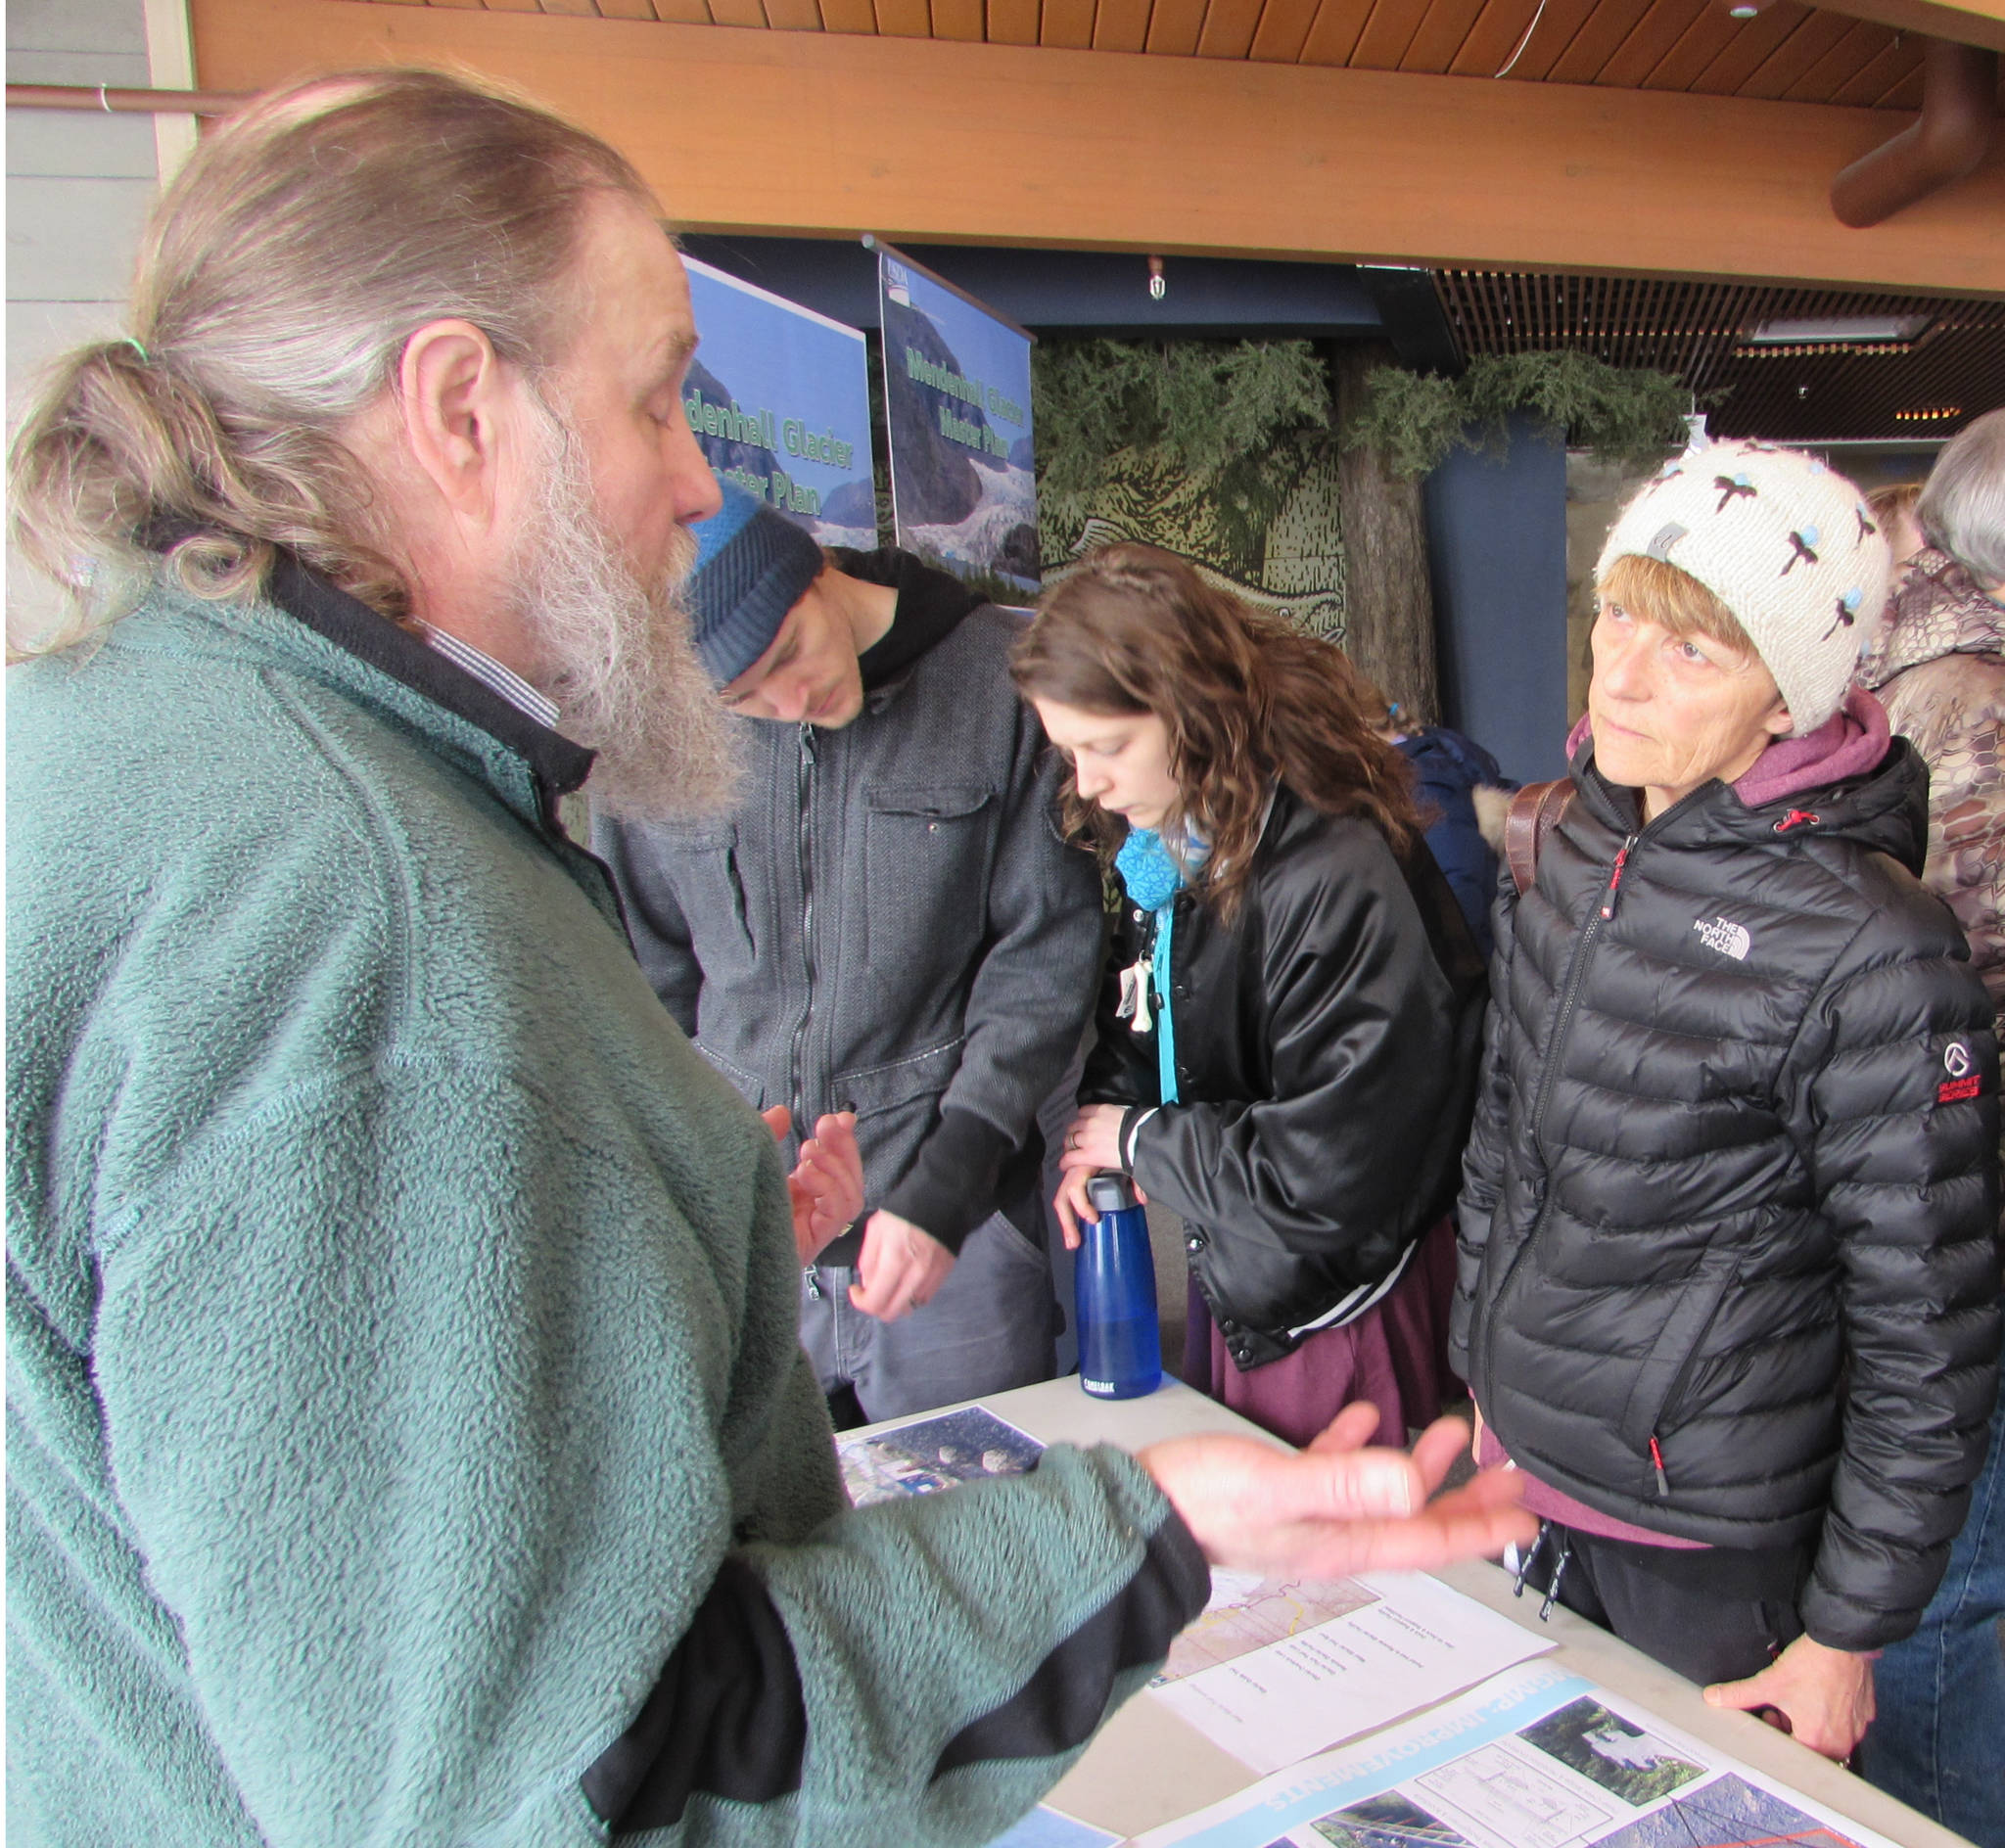 Eric Ouderkirk, left, Alaska Region regional landscape architect for the U.S. Forest Service, talks with Juneau resident Justine Muench, far right, in the Mendenhall Glacier Visitor Center, Saturday, March 2, 2019. (Ben Hohenstatt | Juneau Empire)